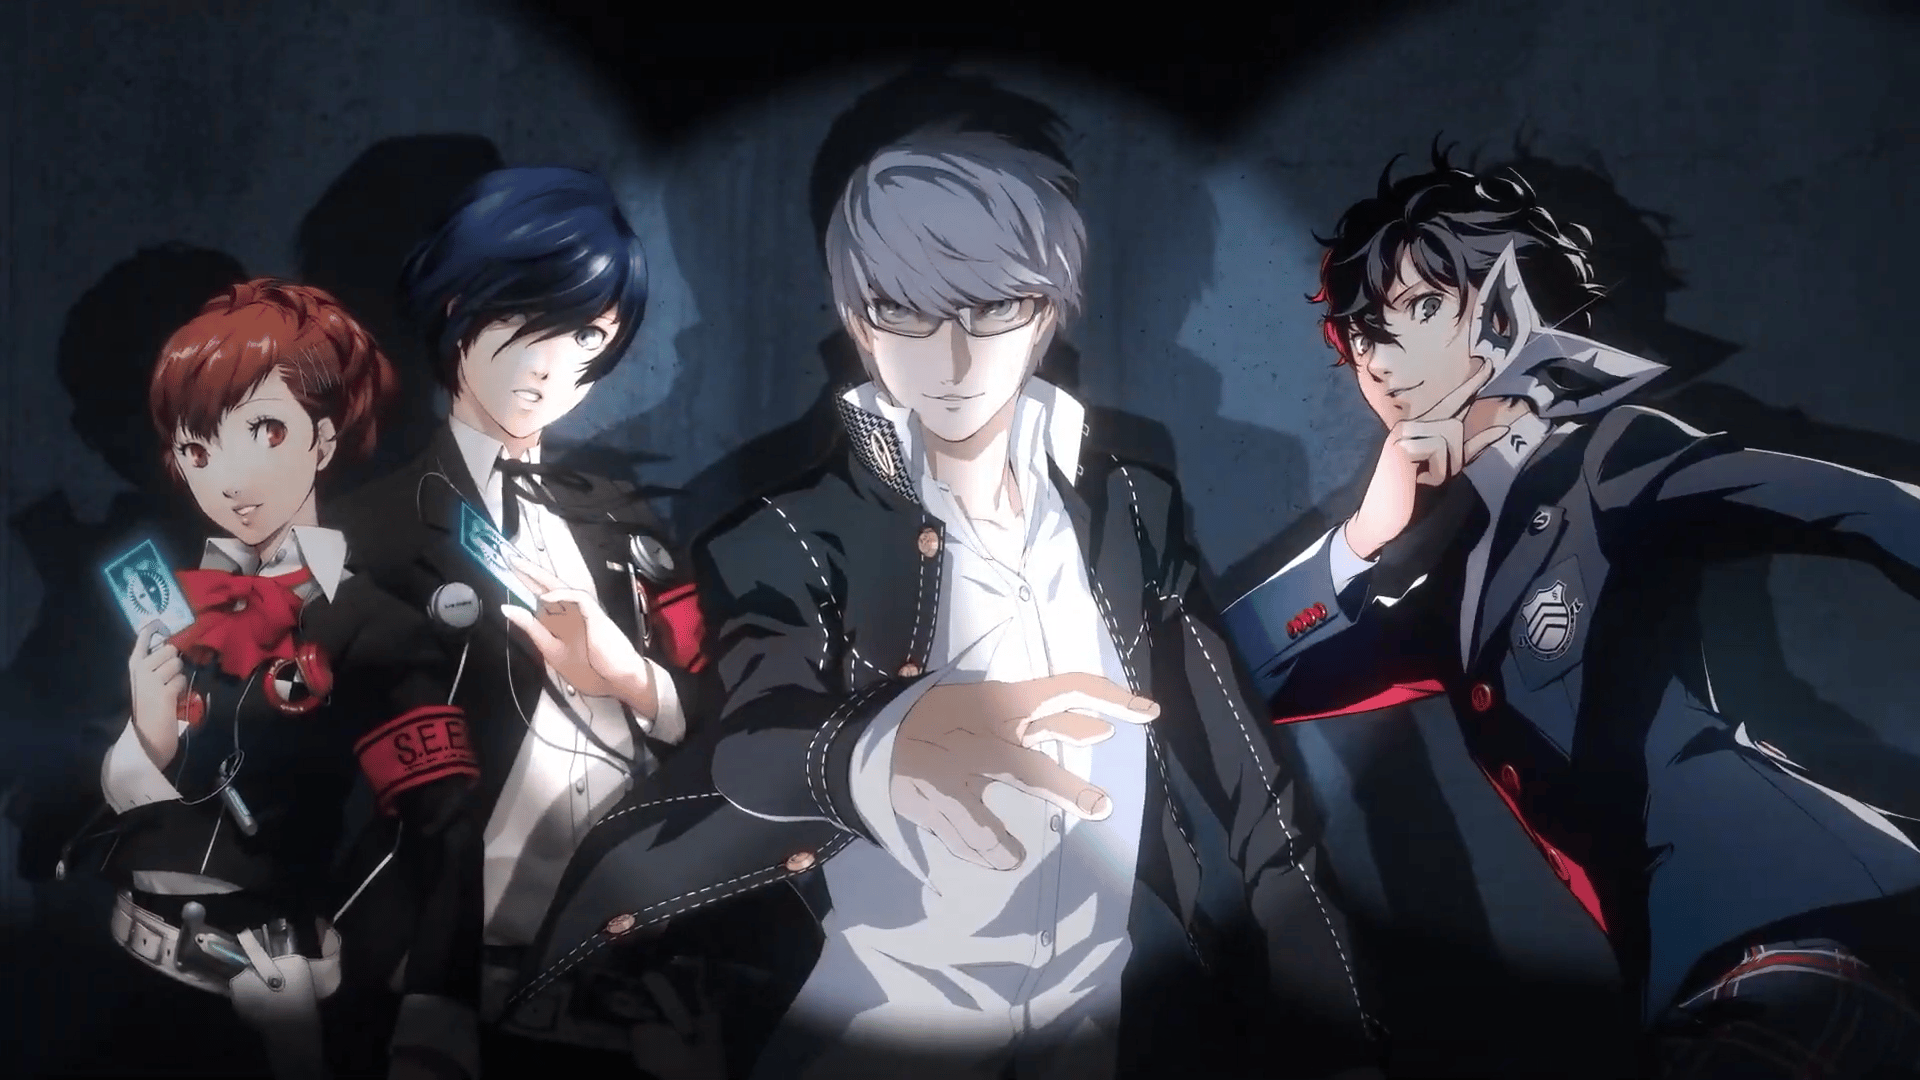 Persona 3 Portable, Persona 4 Golden & Persona 5 Royal Releasing for Nintendo Switch